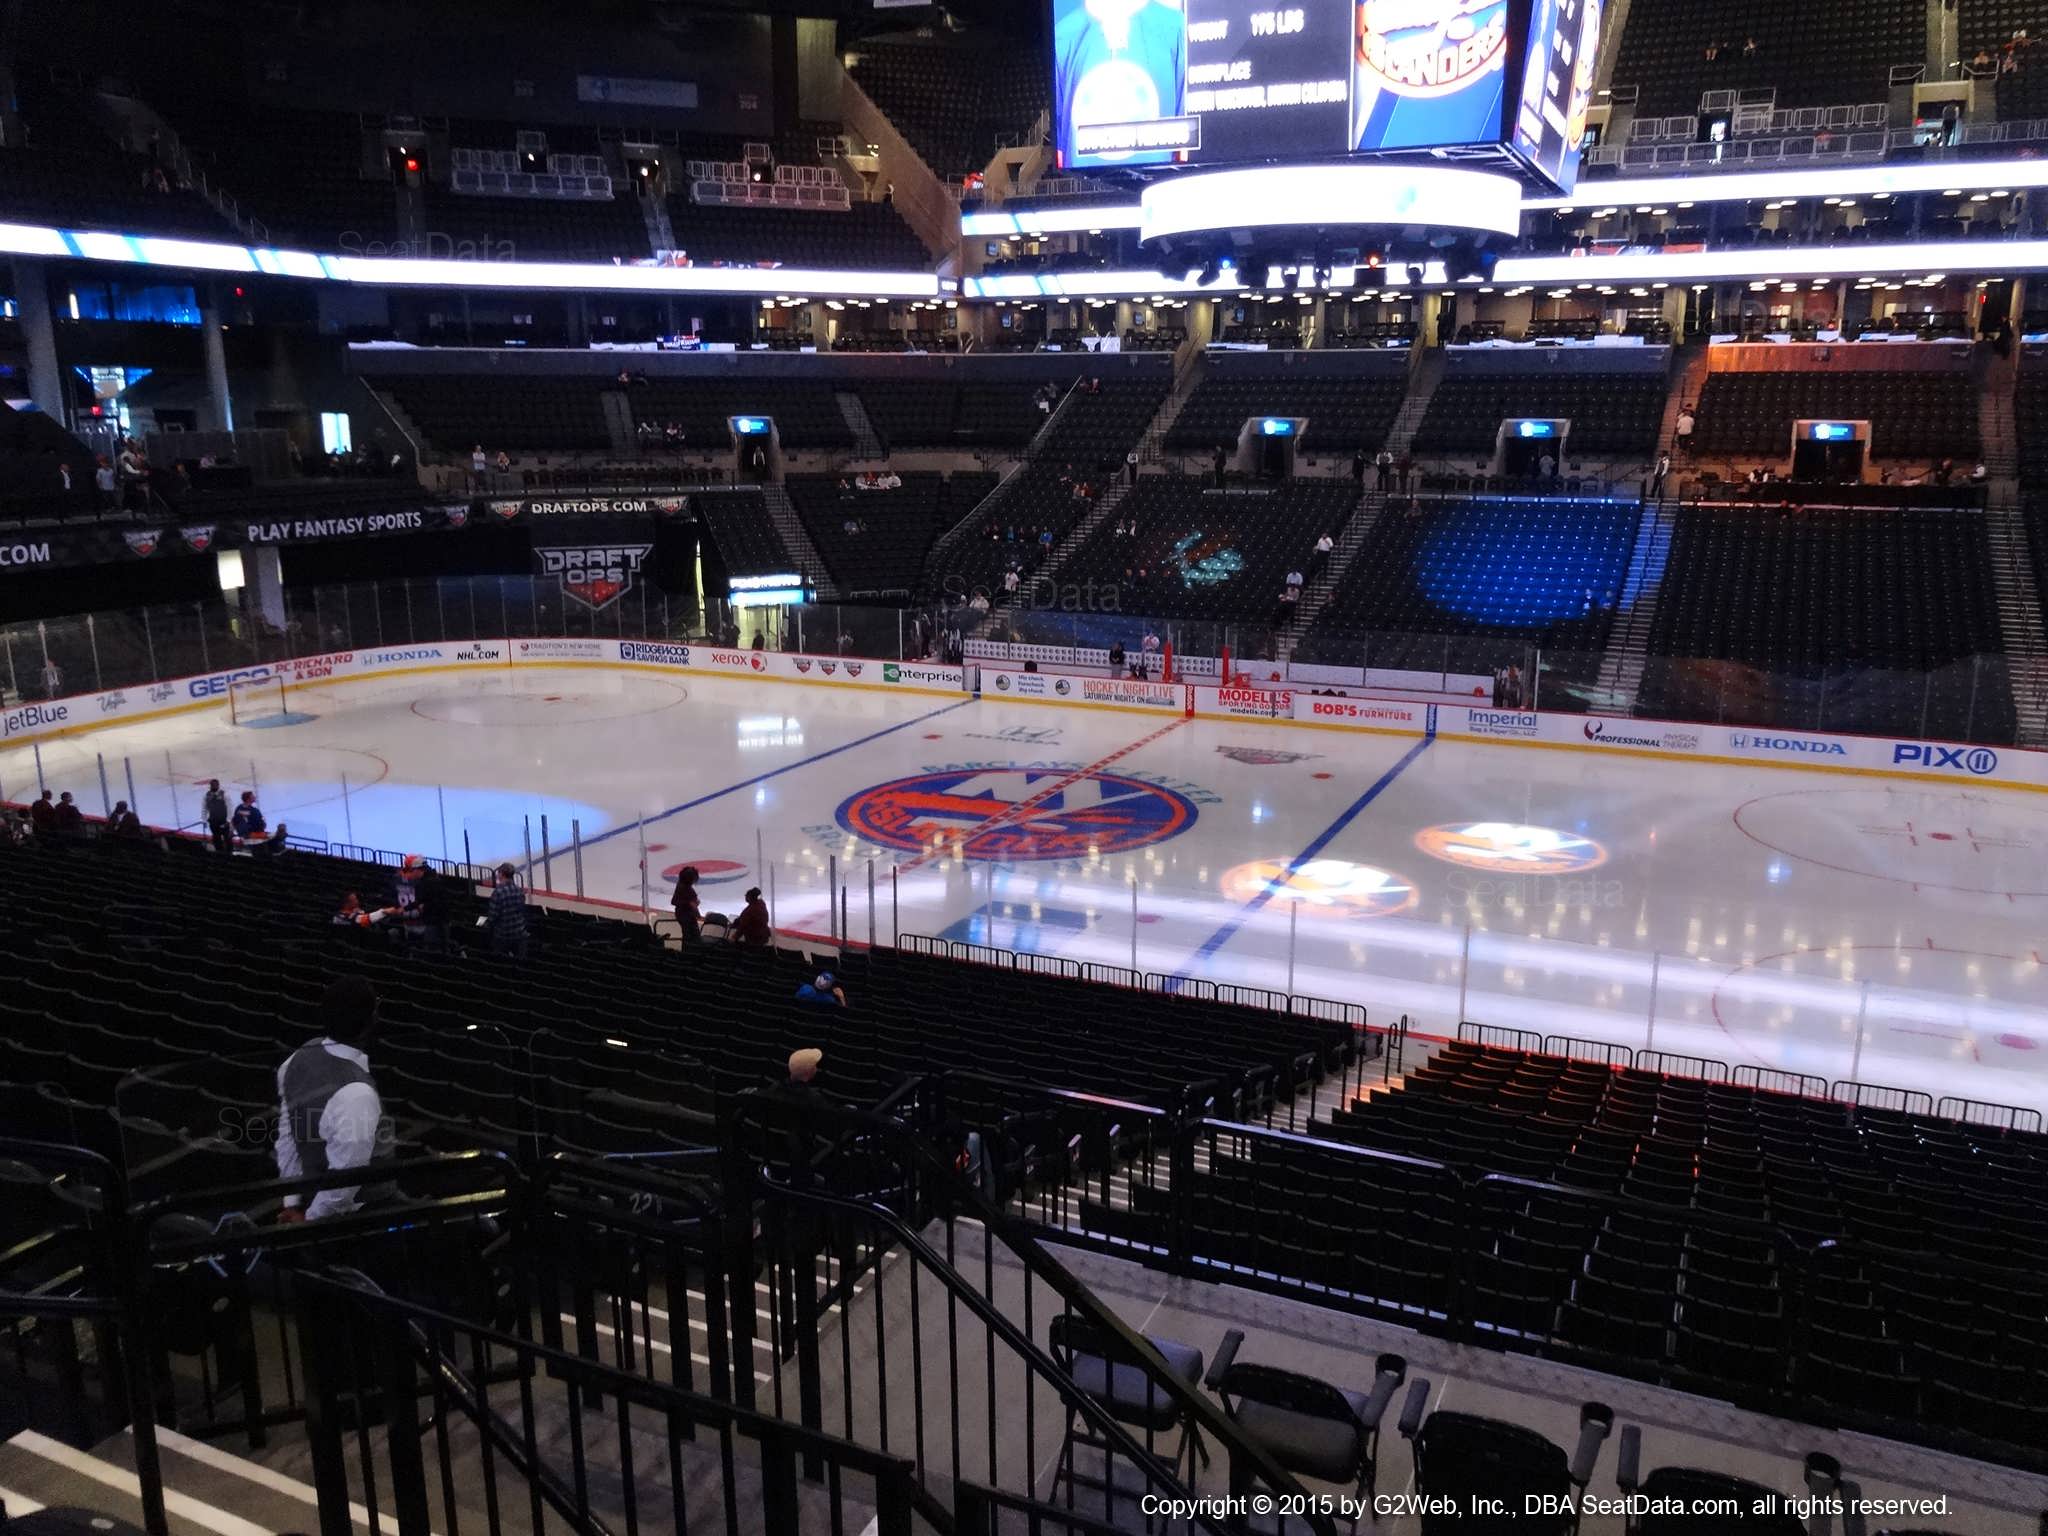 Seat View from Section 123 at the Barclays Center, home of the New York Islanders